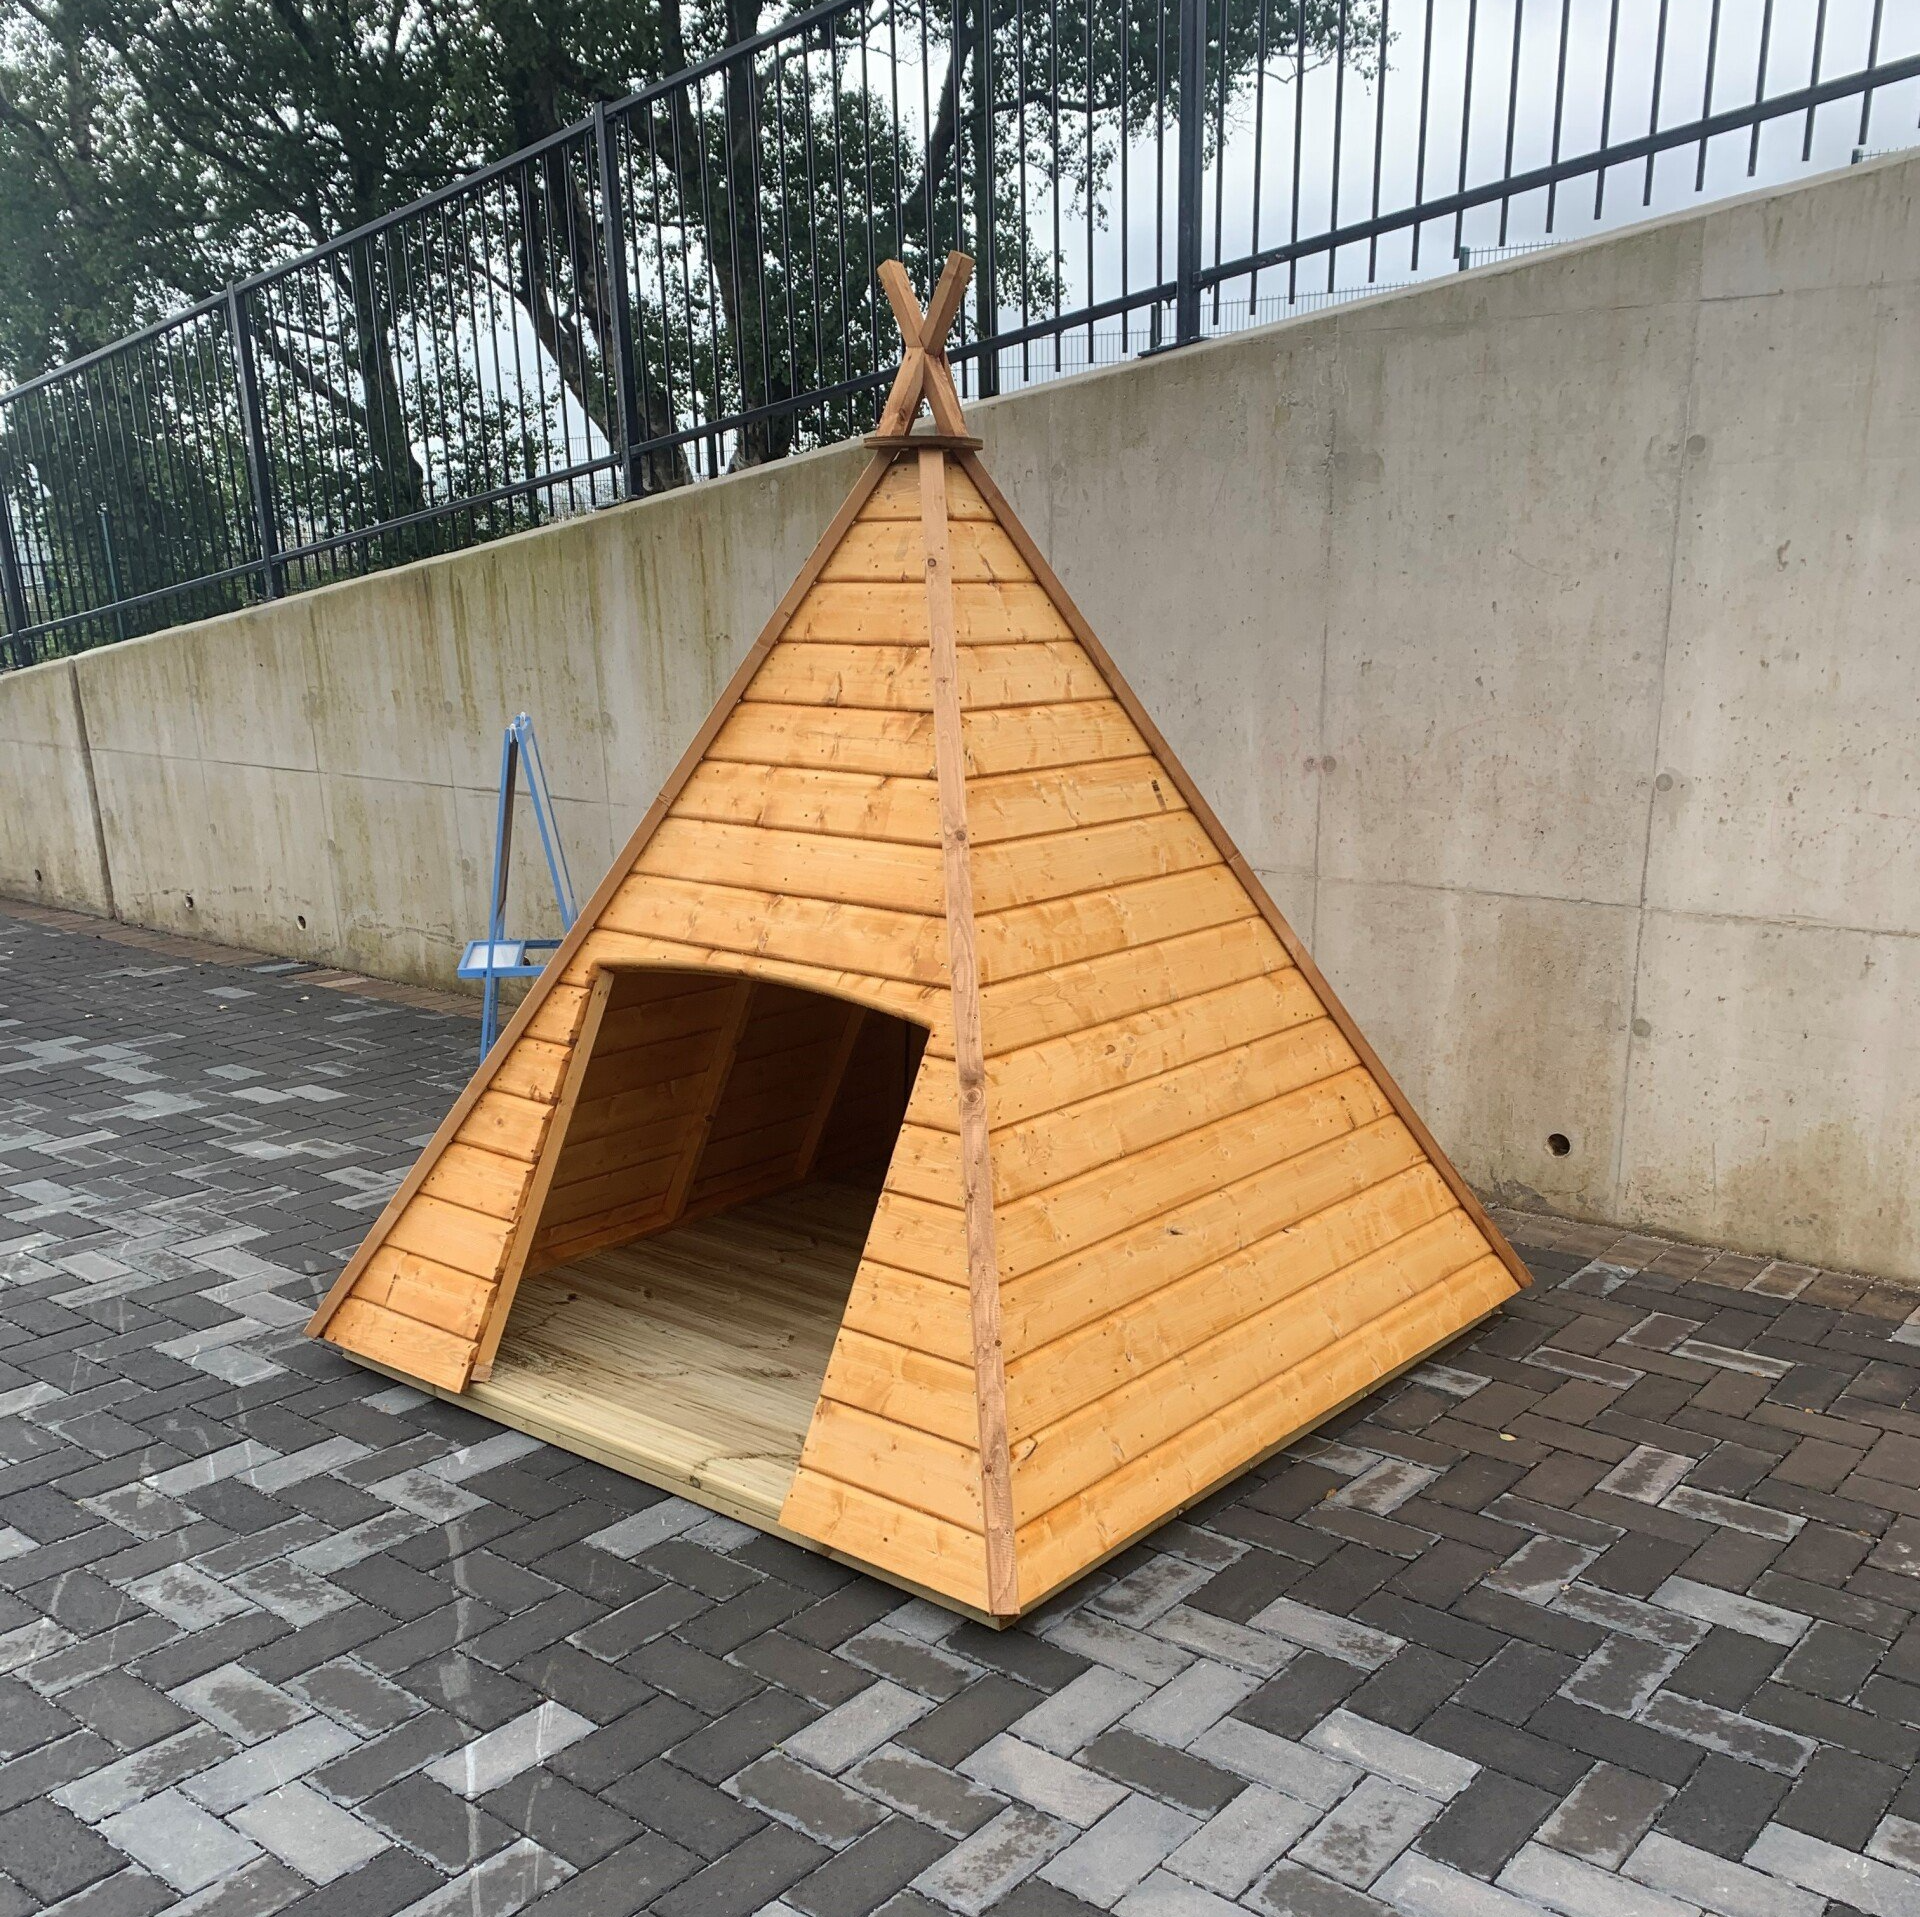 6' x 6' Teepee with smoothed edges and treated in golden brown